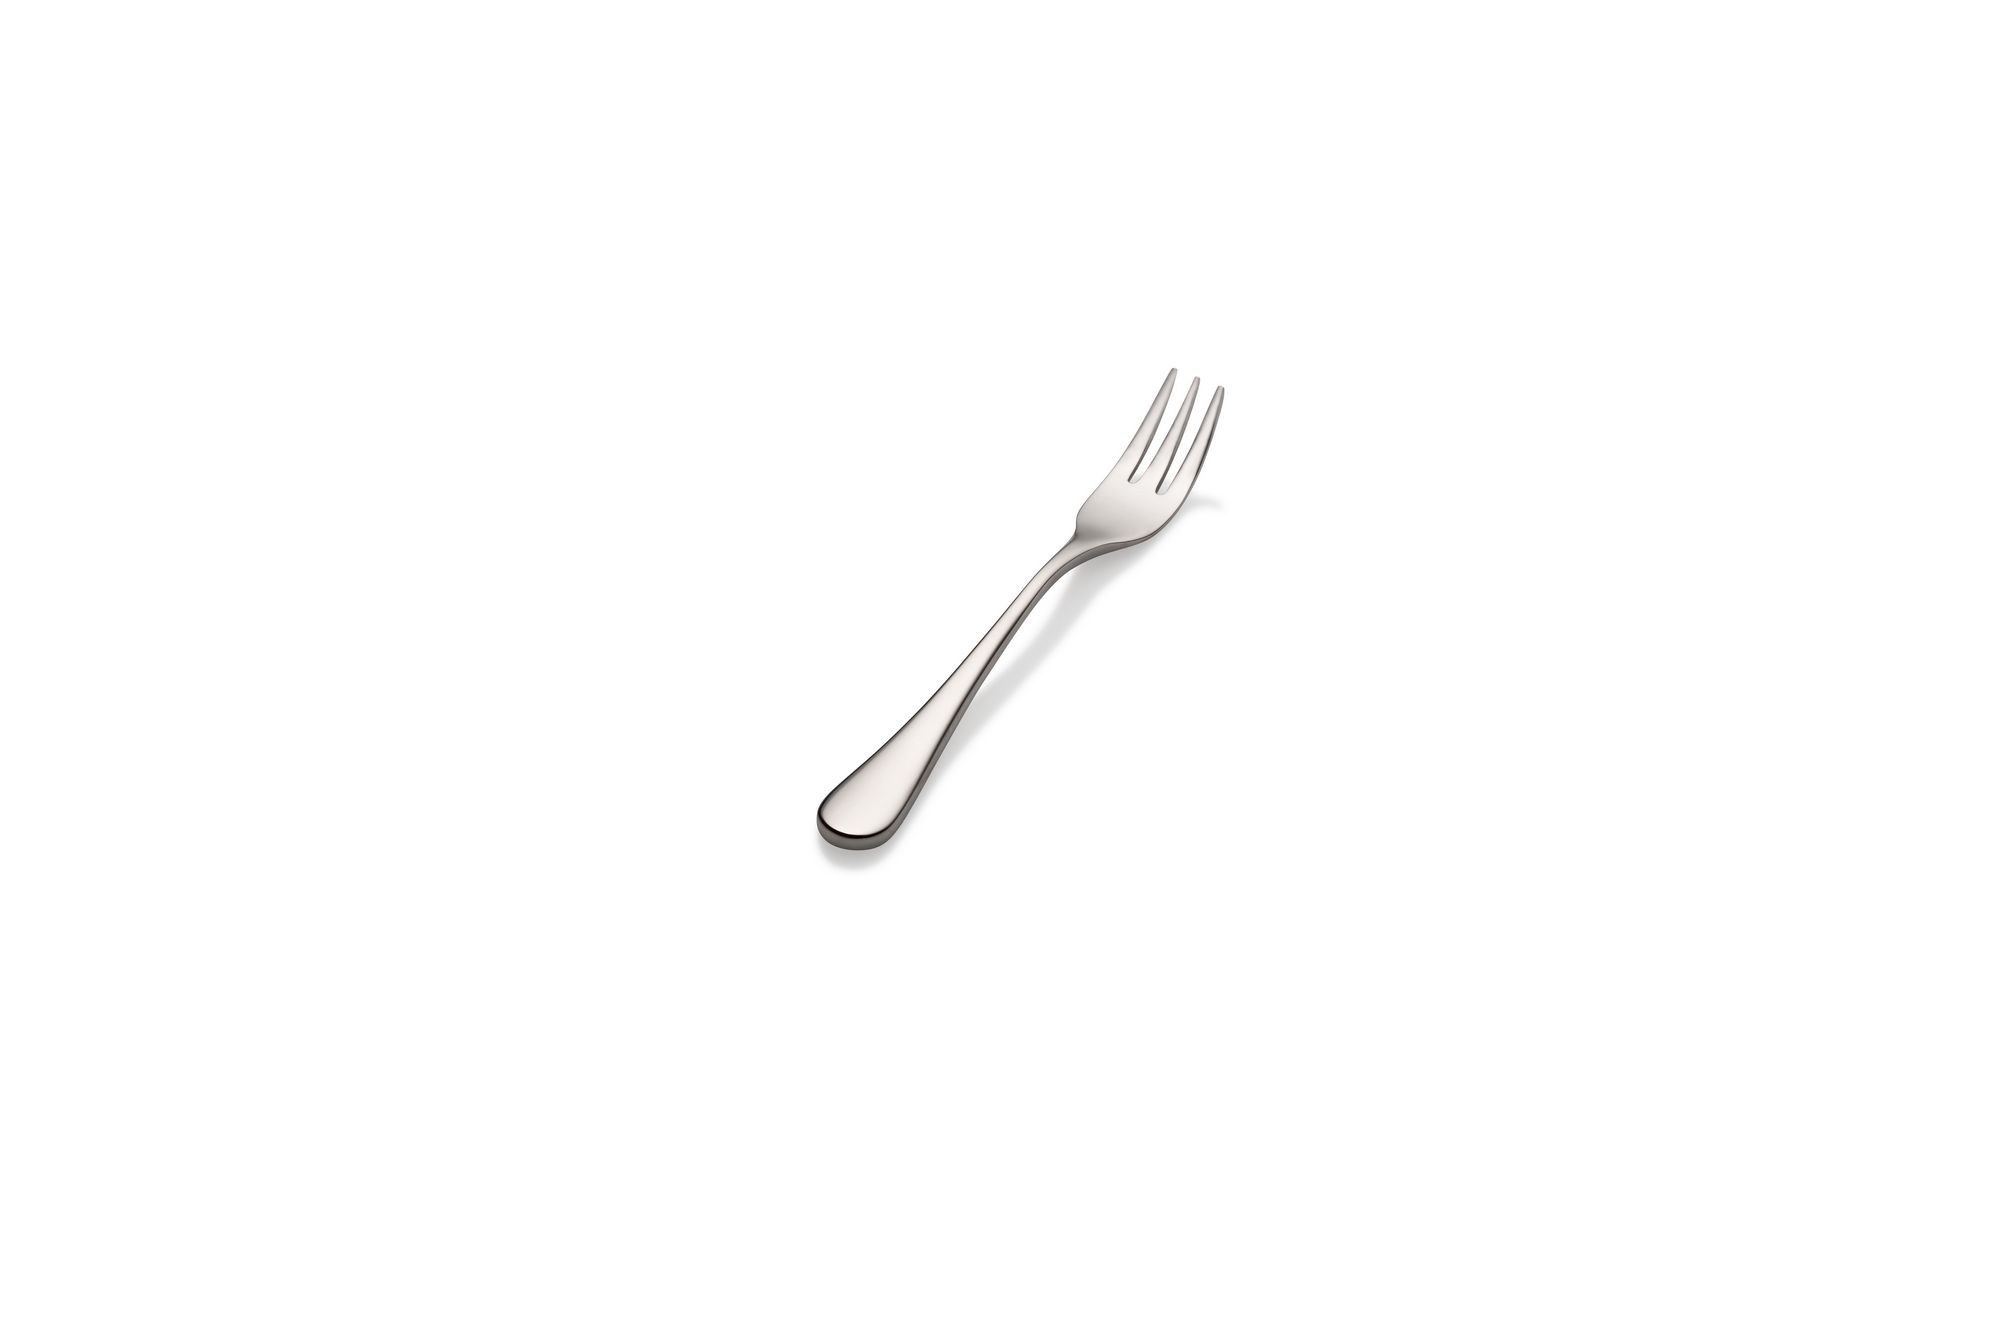 Bon Chef S4008 Como 18/8 Stainless Steel Oyster Fork